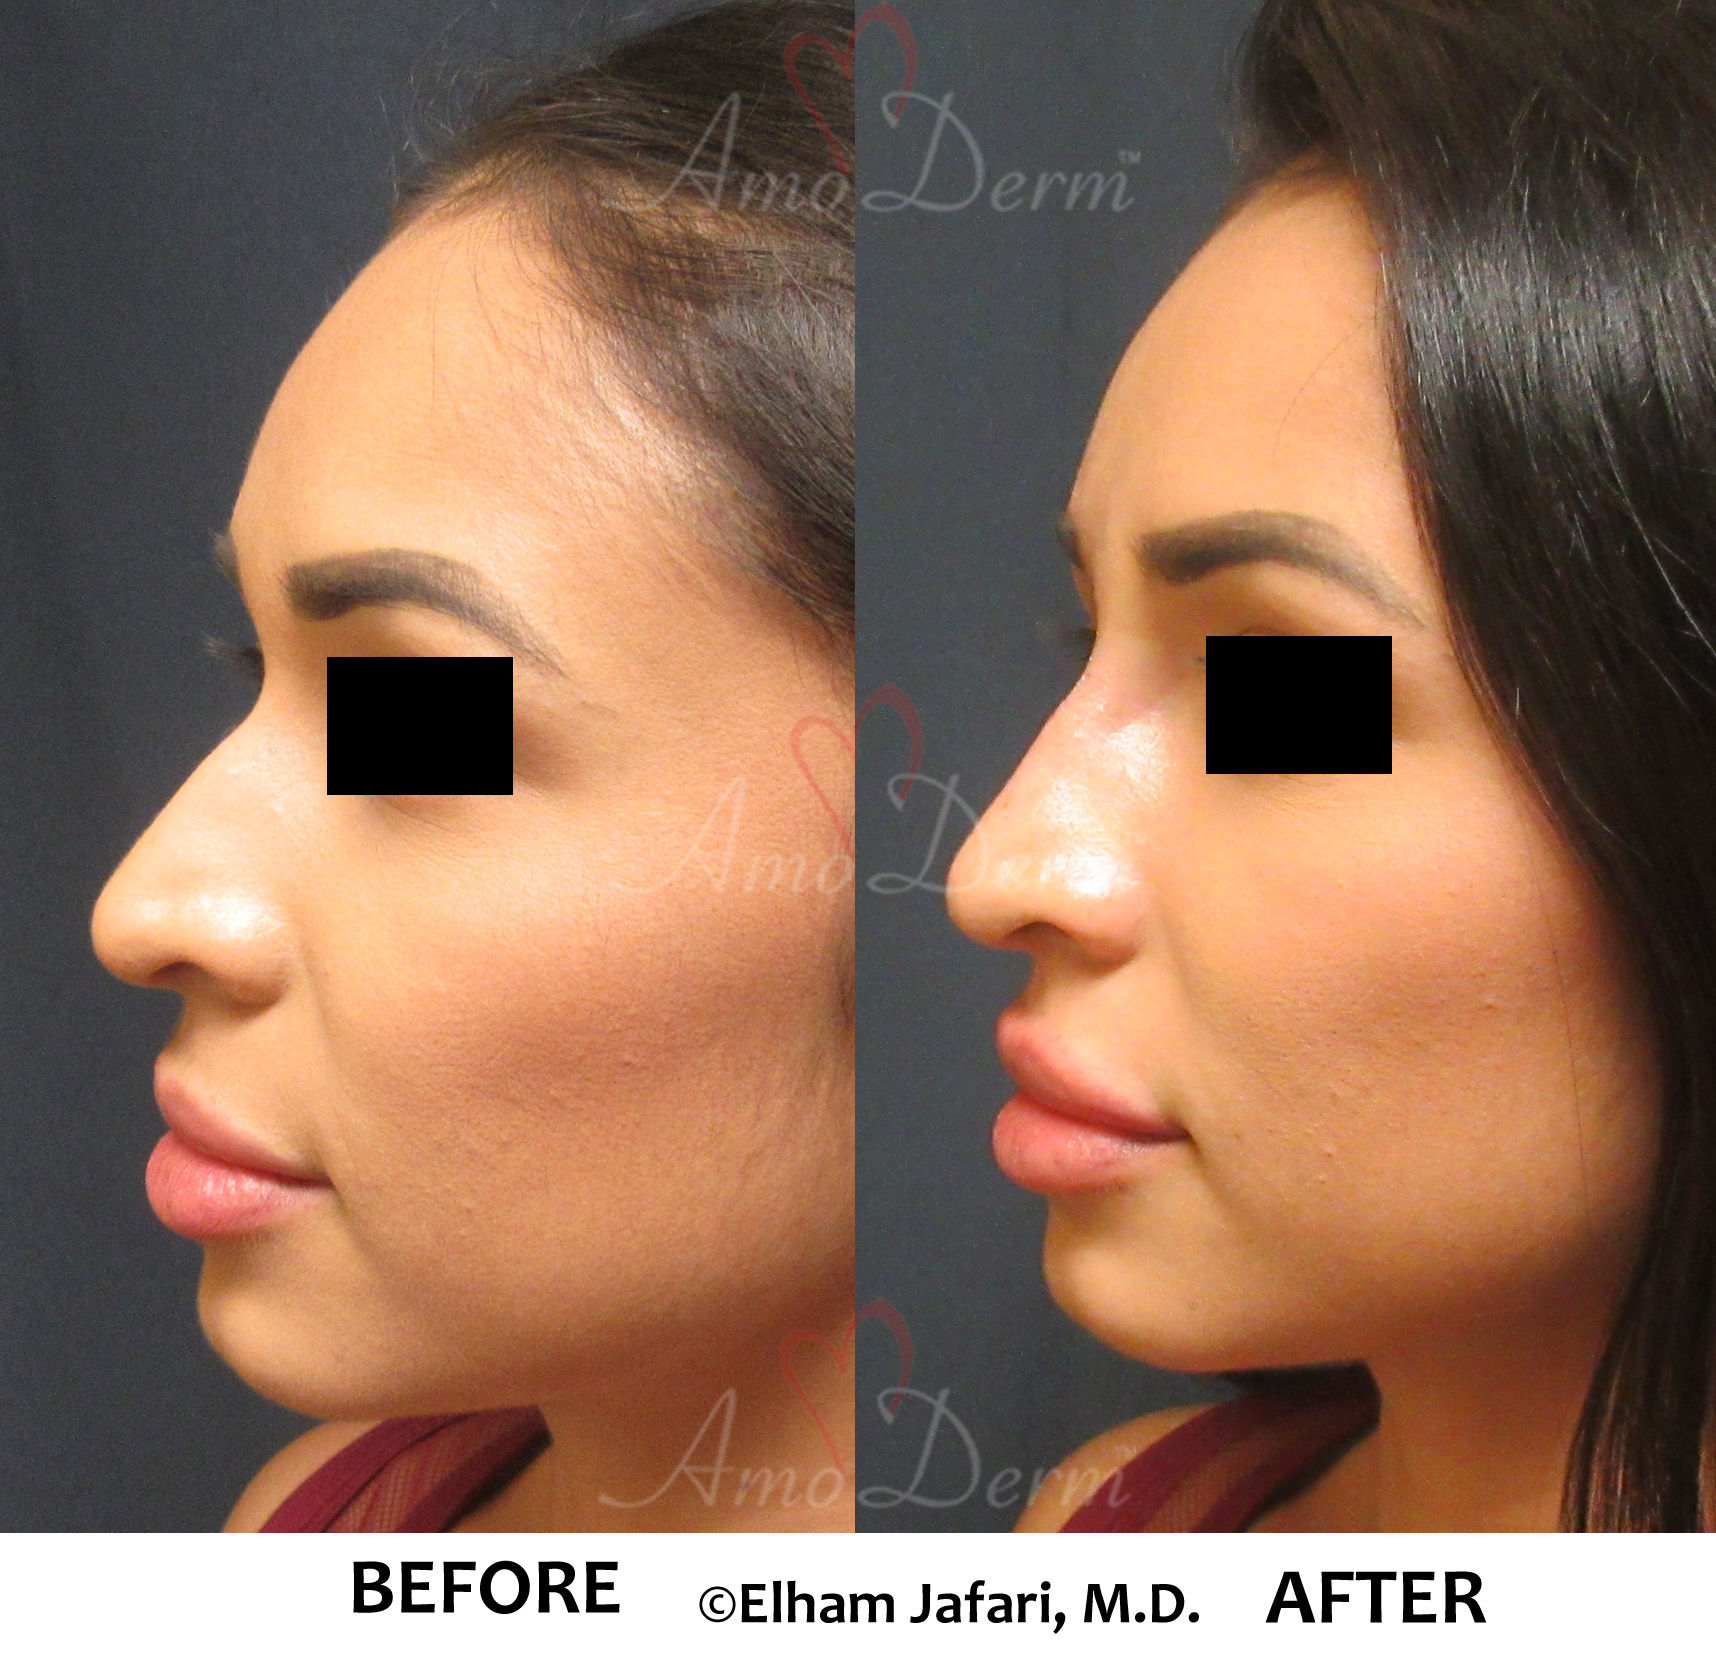 Nonsurgical Nose Job Cosmetic Treatments Before and After Pictures.